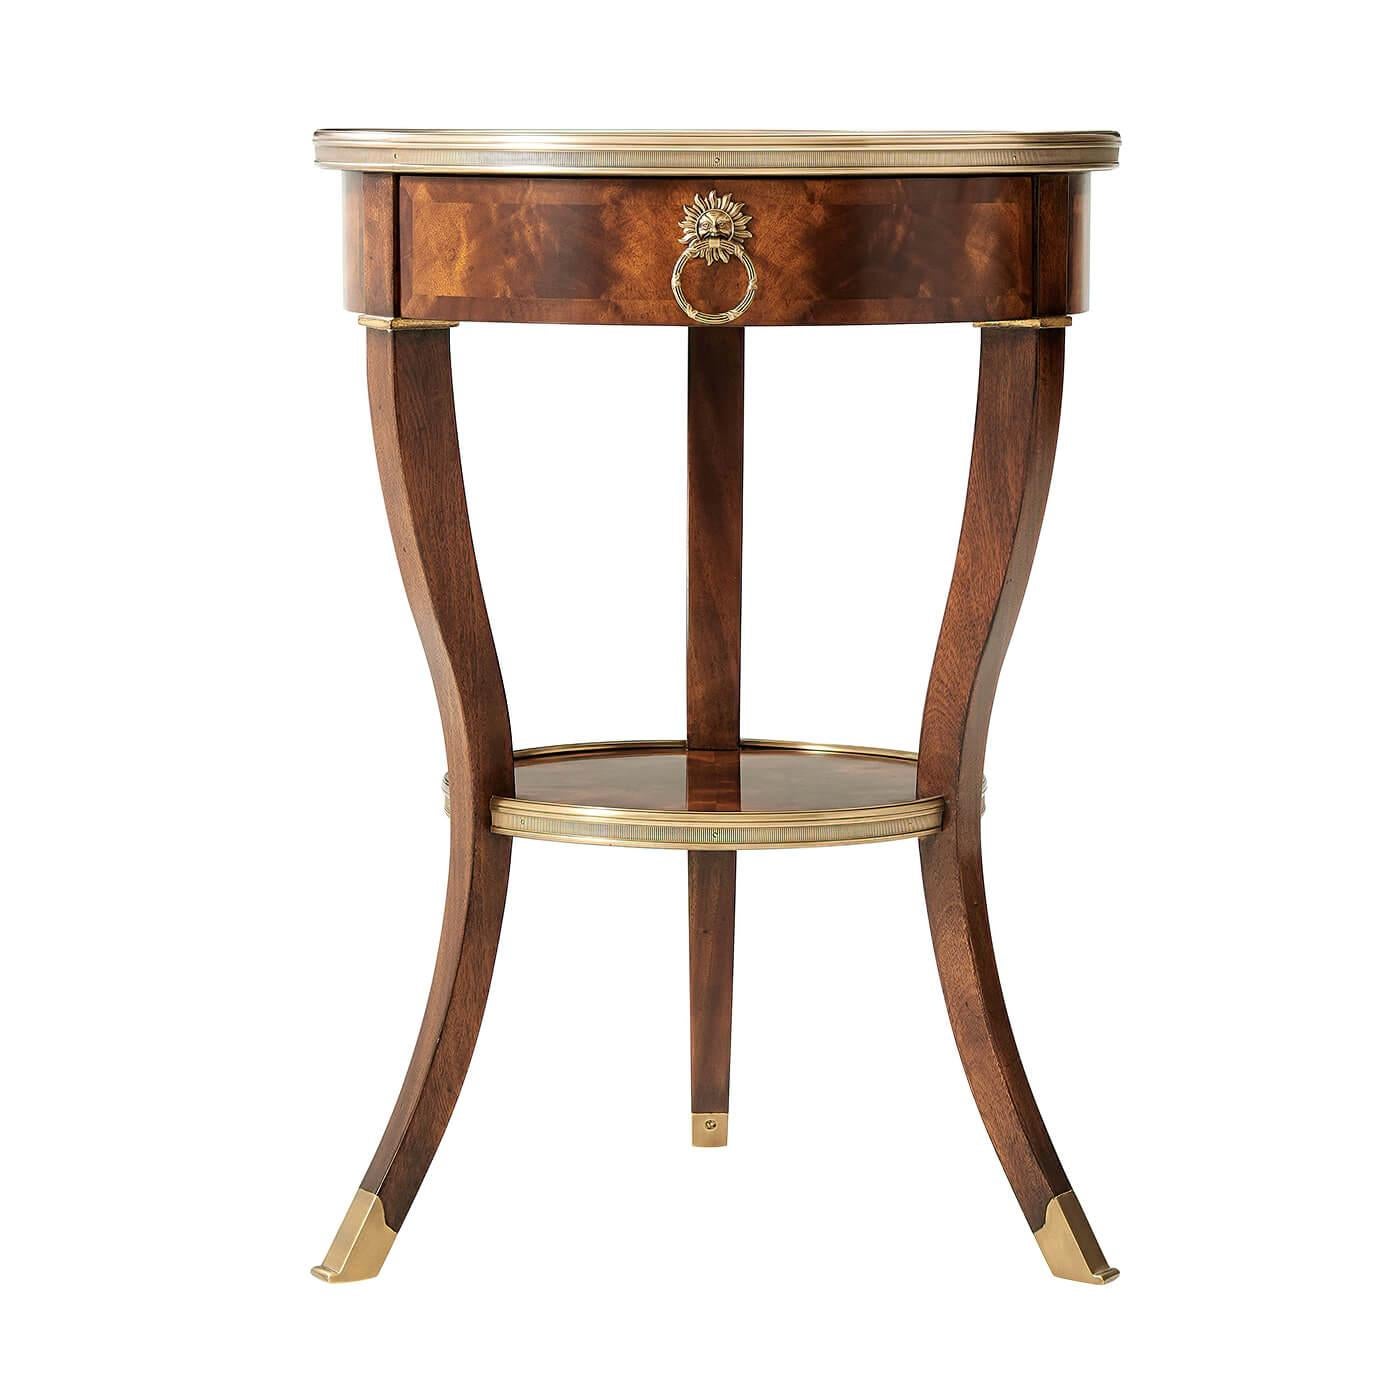 A mahogany neoclassic round end table with one frieze drawer, inswept splay legs, under tier. 

Dimensions: 20